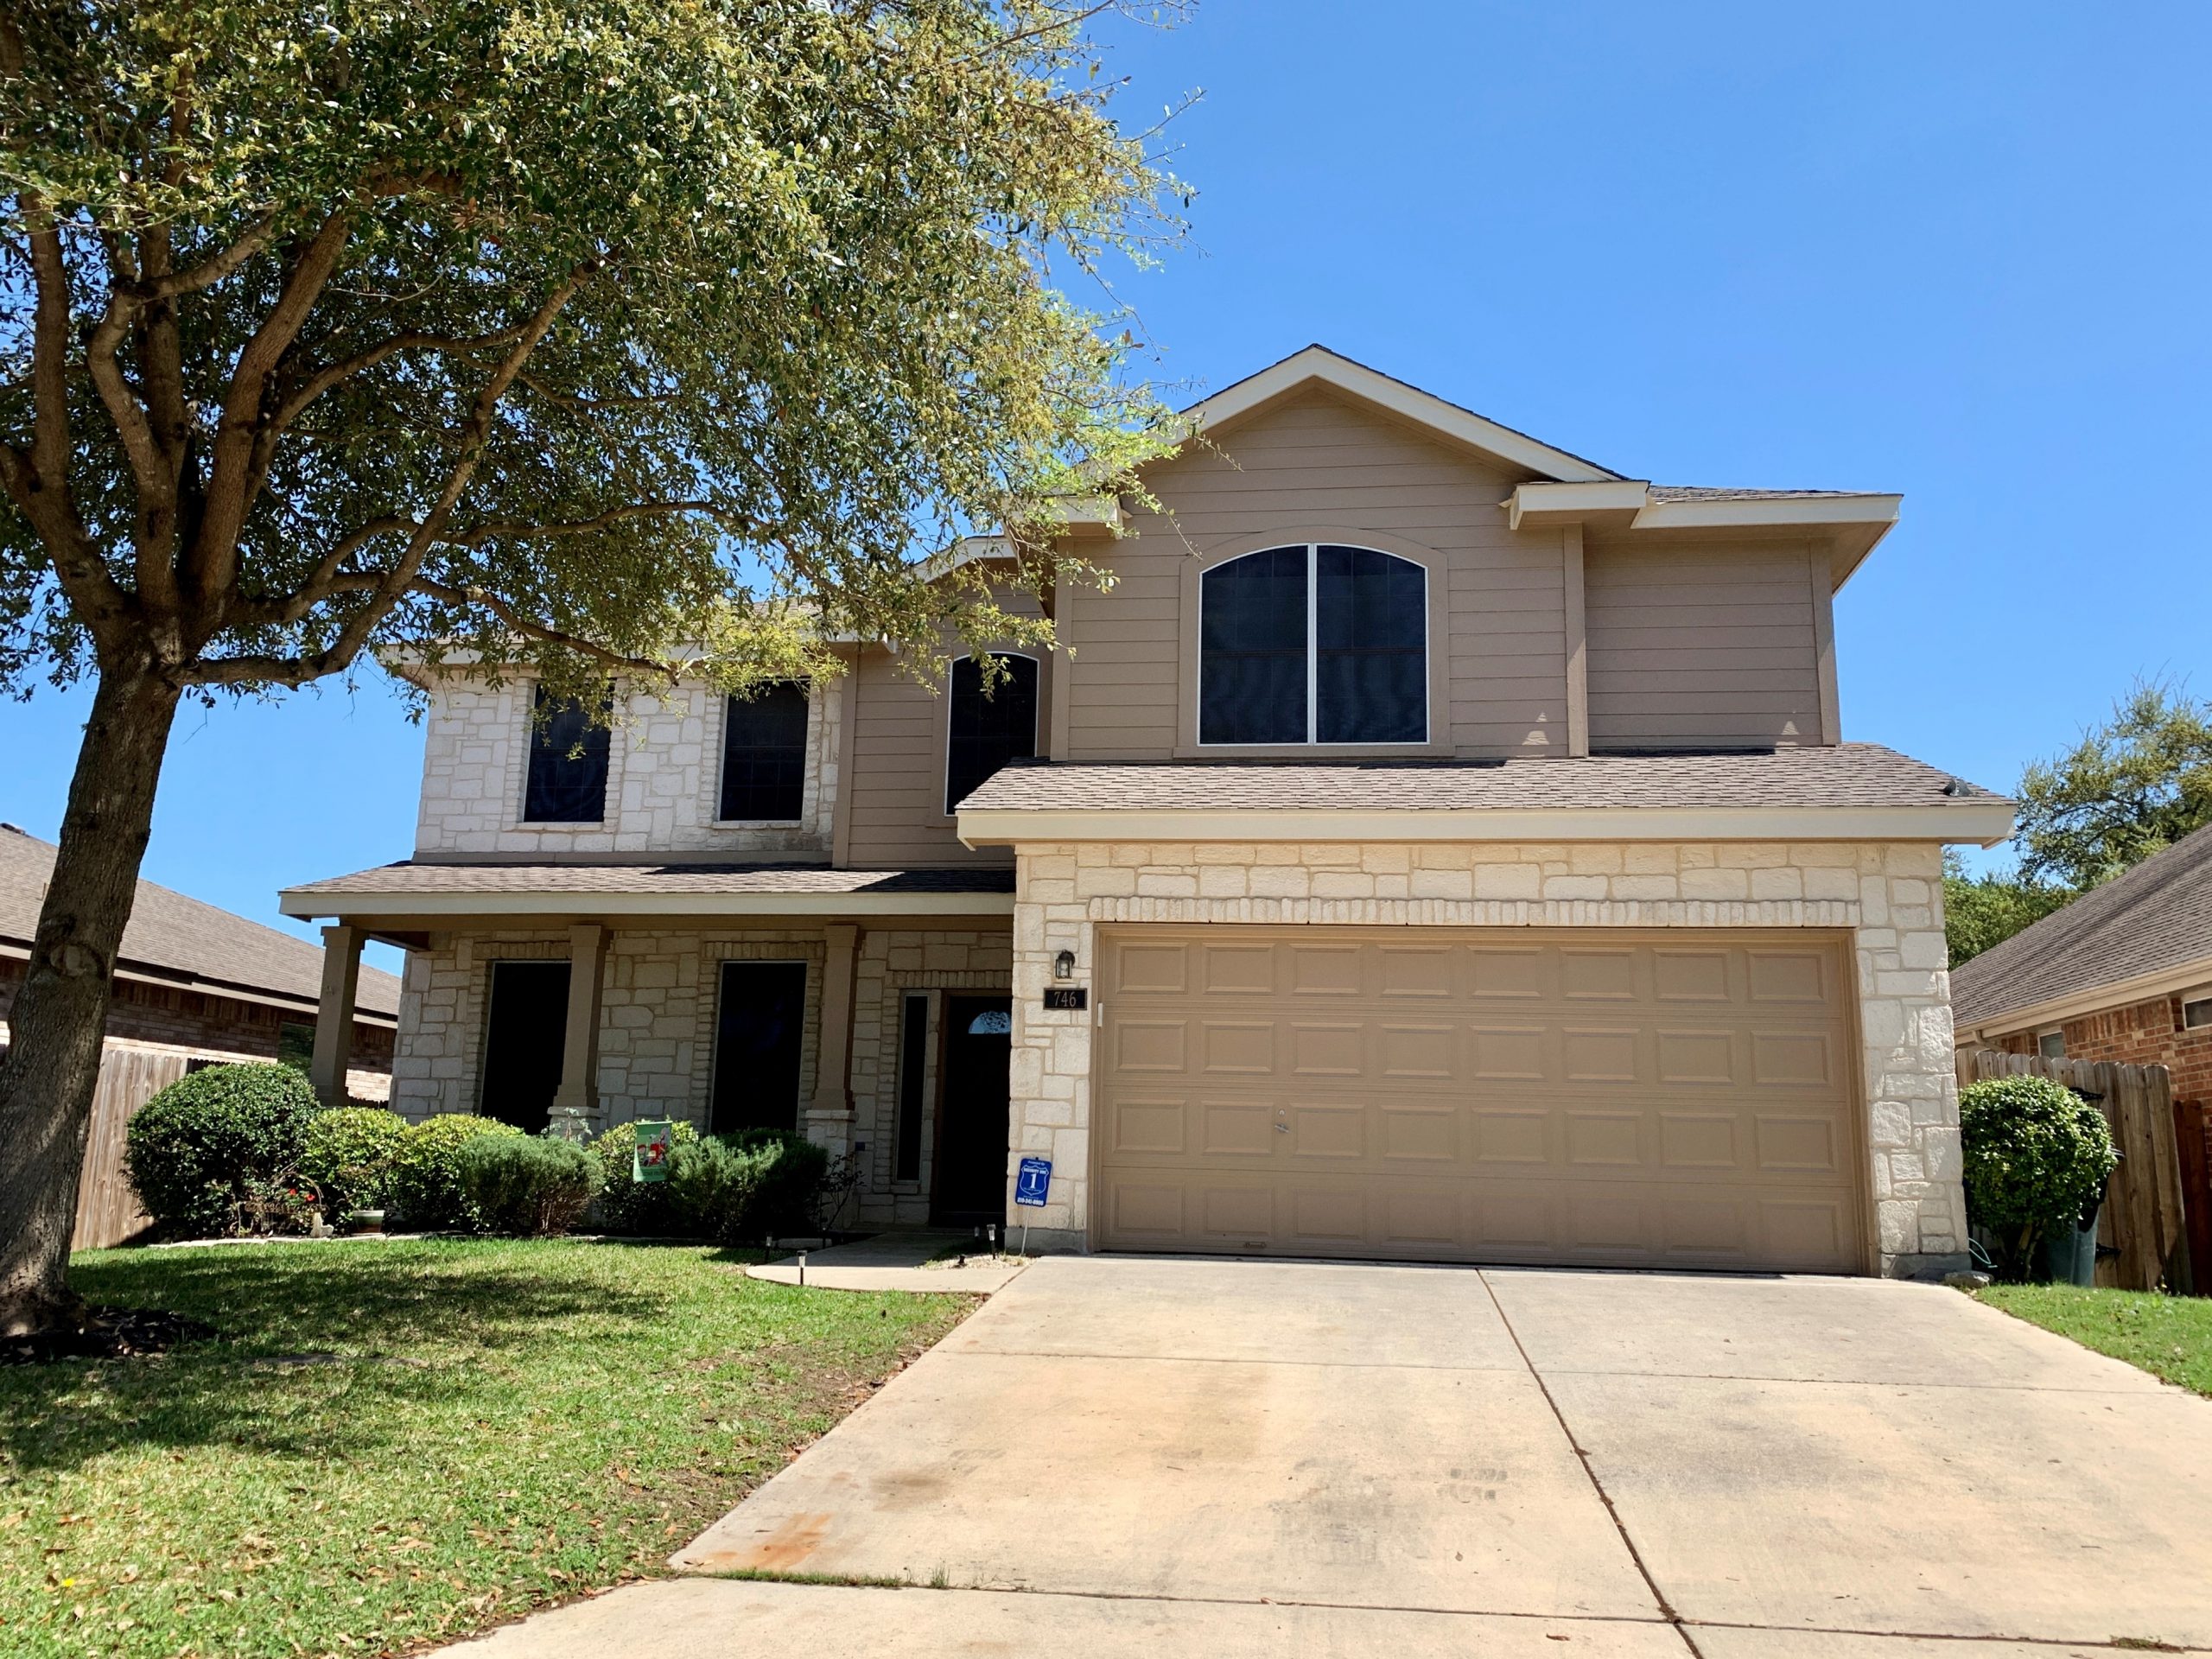 exterior painting transformation in cibolo